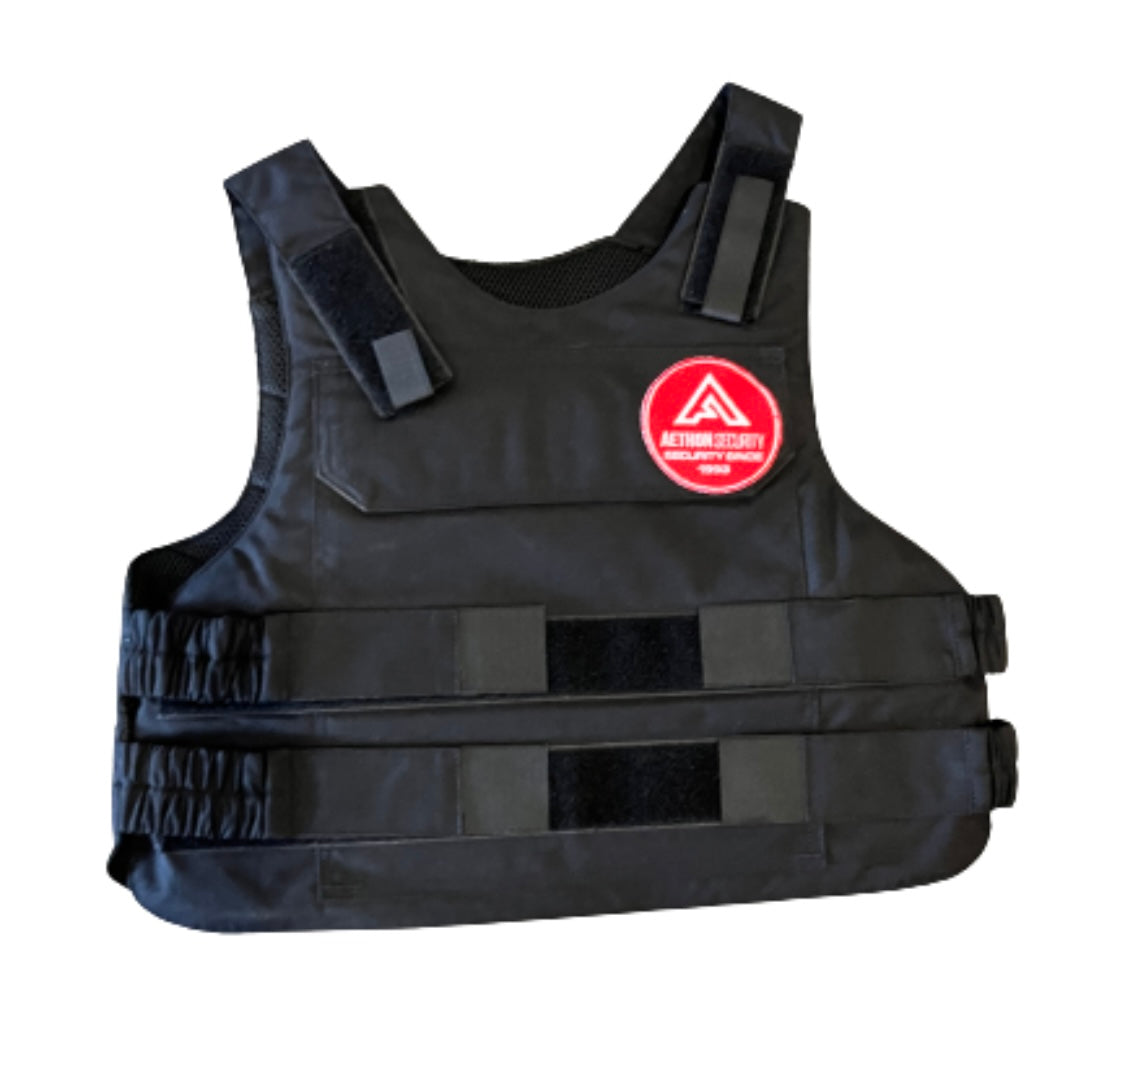 WRATH OF MAN: AETHERTON Security Guard Vest